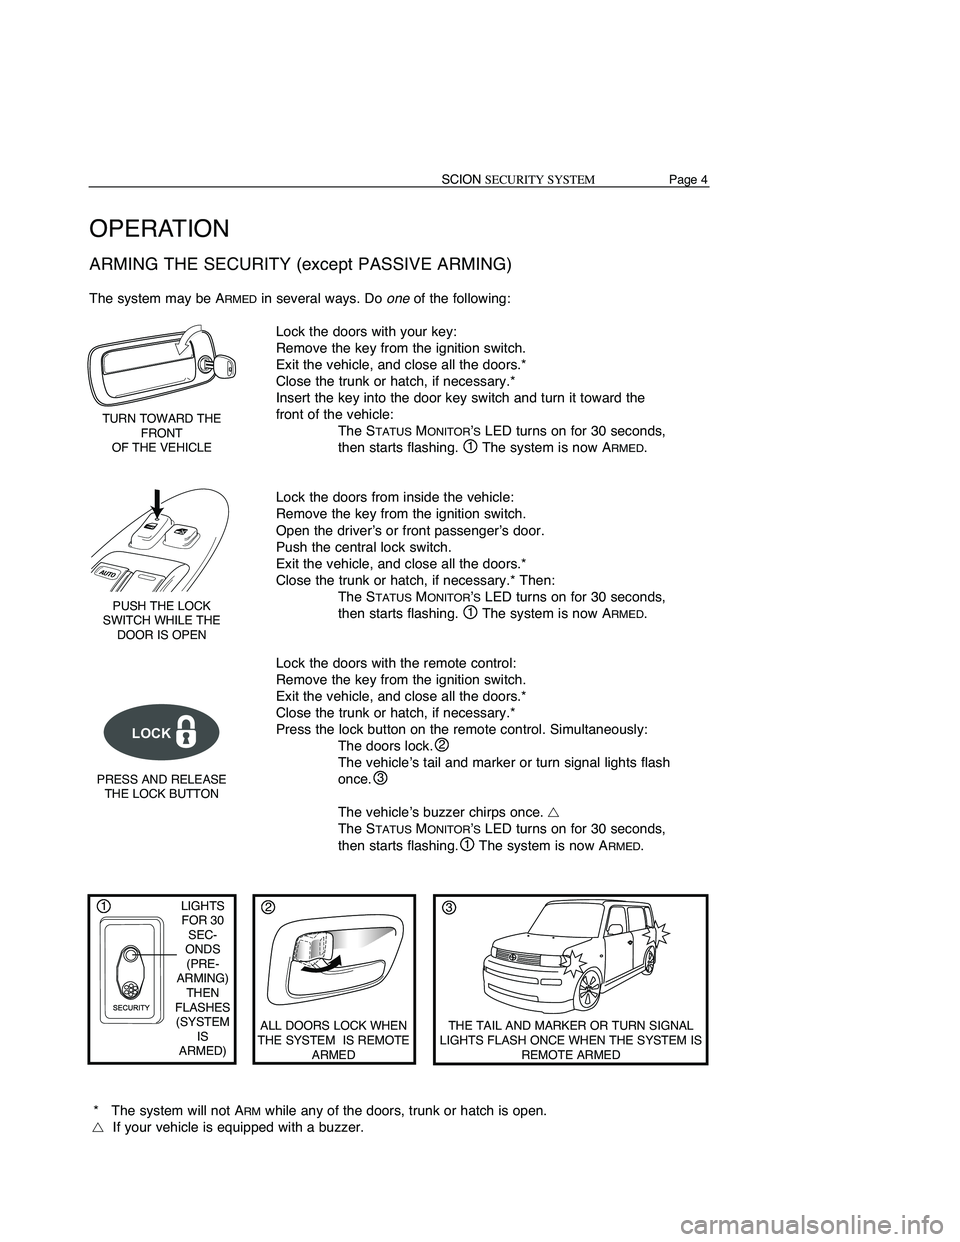 TOYOTA xD 2008  Accessories, Audio & Navigation (in English) Page7SCIONSECURITY SYSTEM
OPERATION
AUTOMAT ICREARMING
When youunlock thedoors usingtheremote control, theScion Security isDISARMEDat the same
time. However, ifyou donot open adoor within 30seconds, t